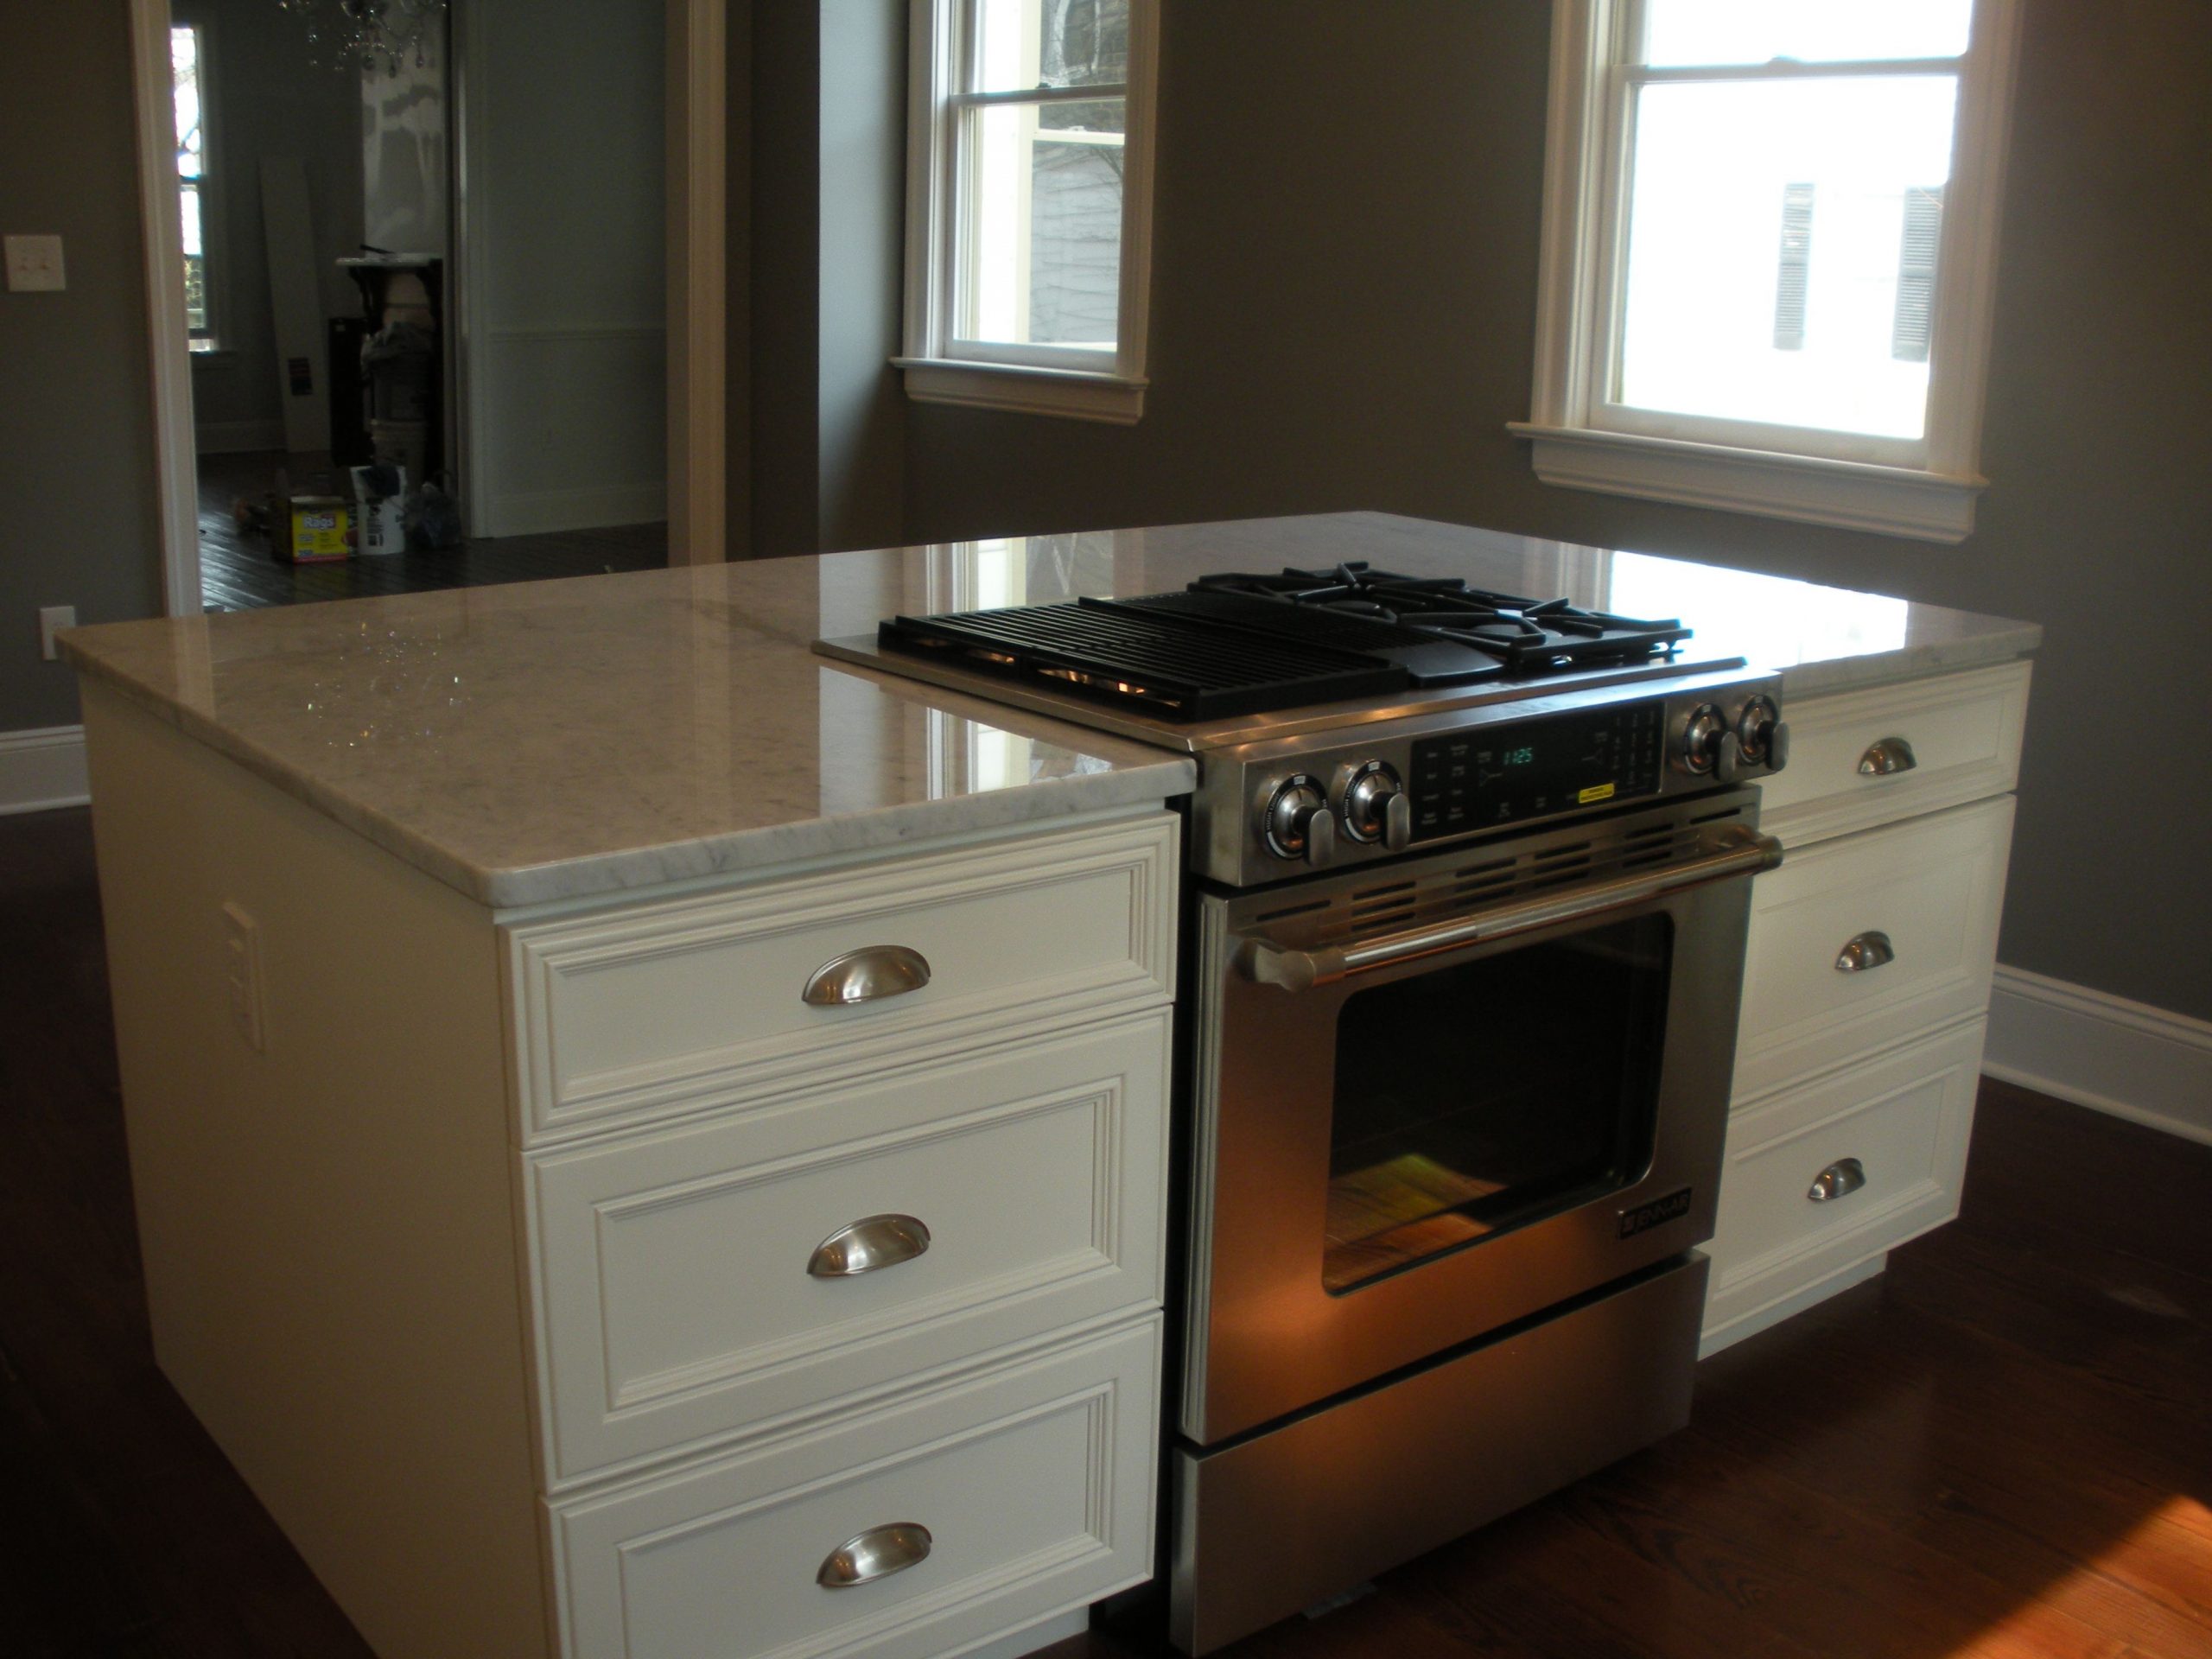 Countertop Stove Island The Latest Trend In Countertop Stove Island